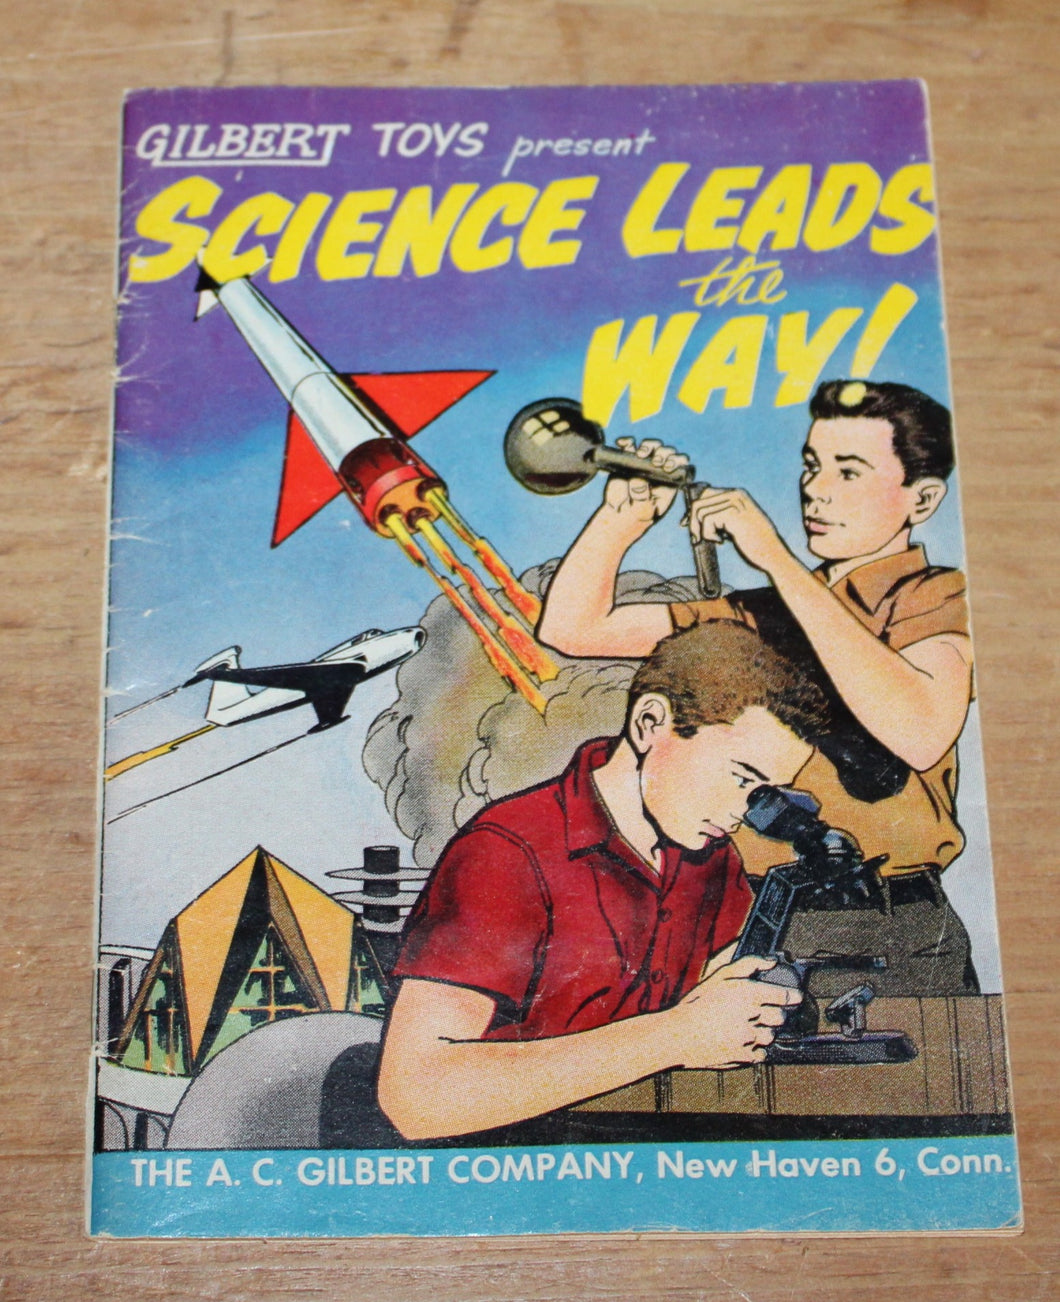 Gilbert Toys Presents: Science Leads the Way -1959 Comic Book Paperback